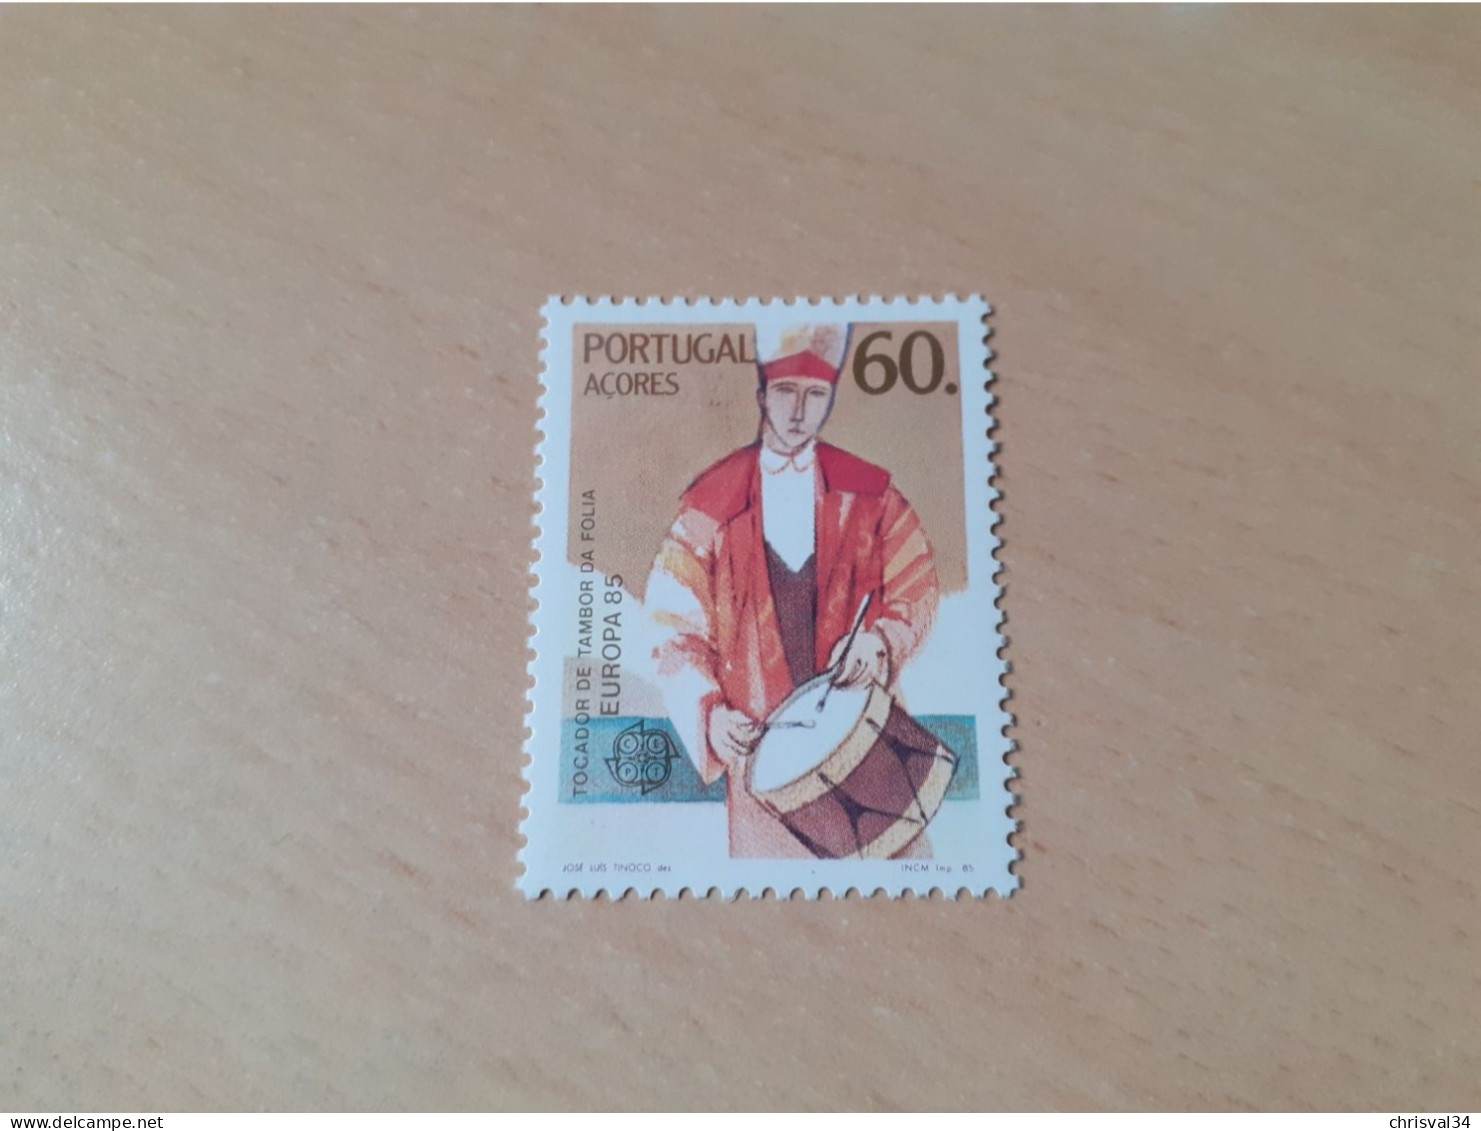 TIMBRE   ACORES   ANNEE   1985   N  362   NEUF   LUXE** - Azores